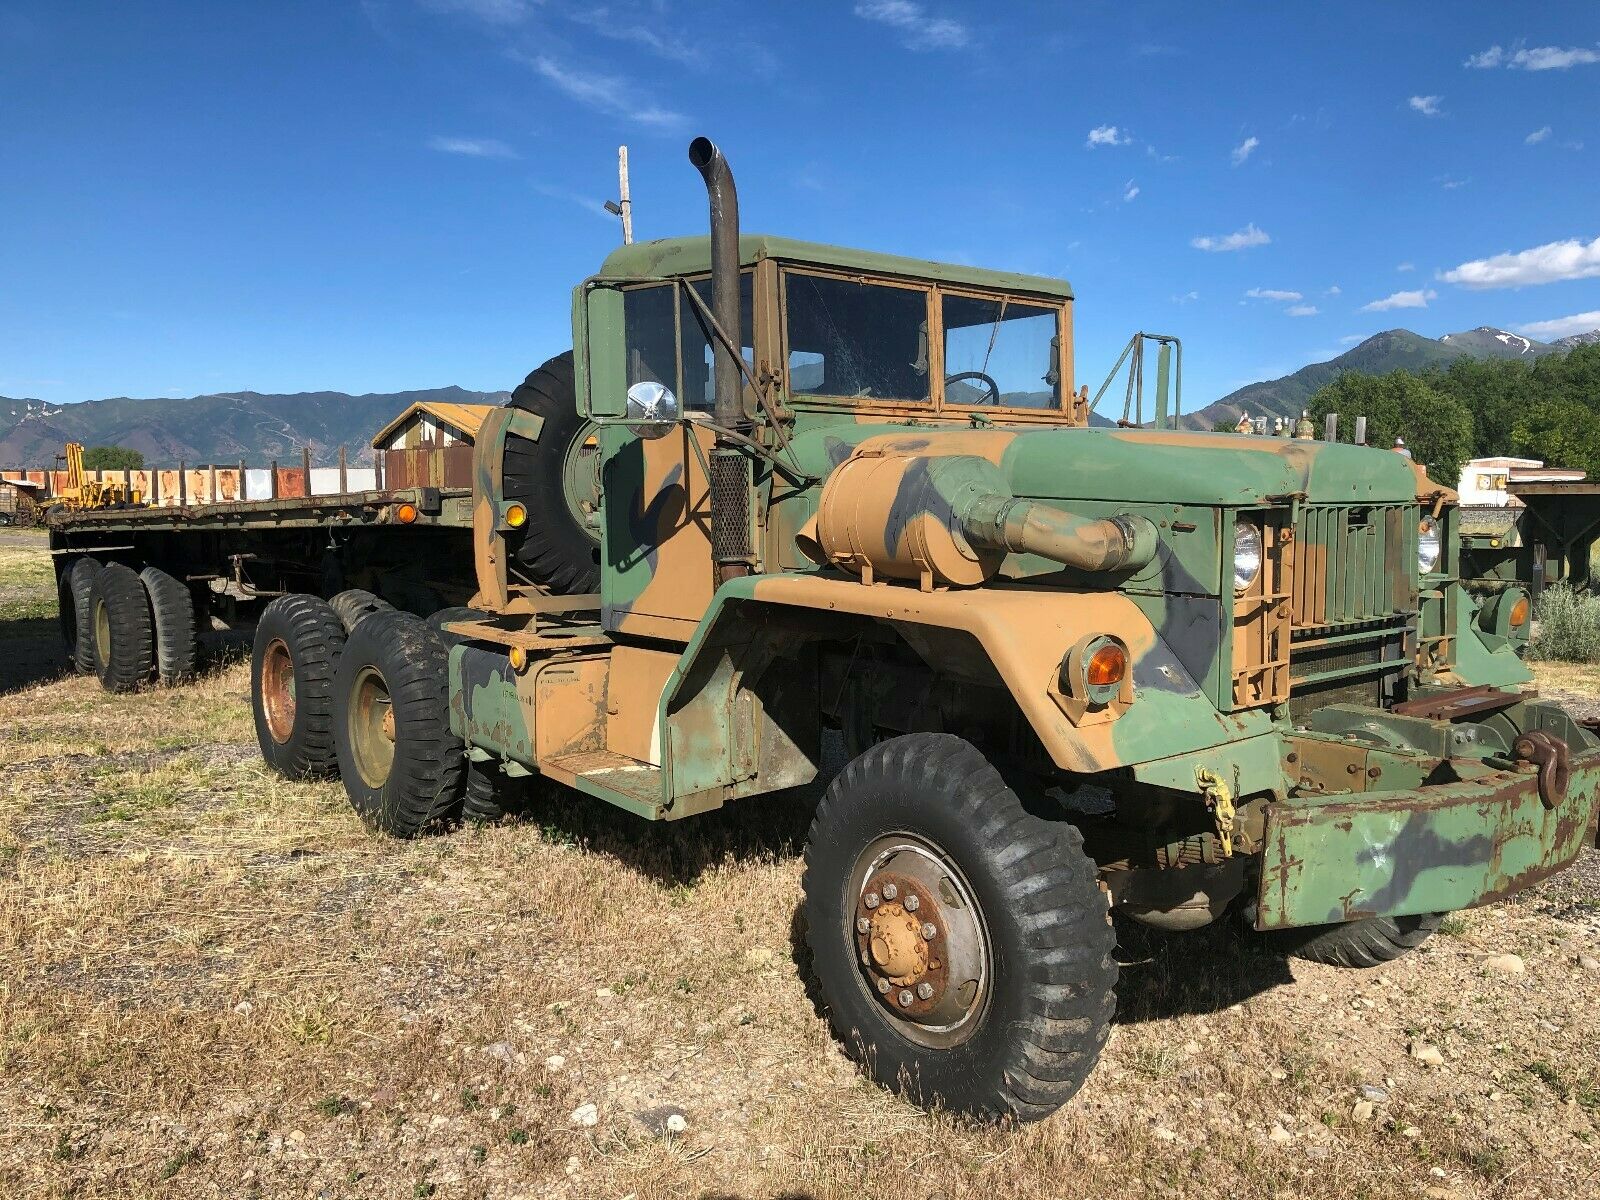 Follow Military vehicles for sale on Pinterest. low miles 1962 Kaiser M52 A...